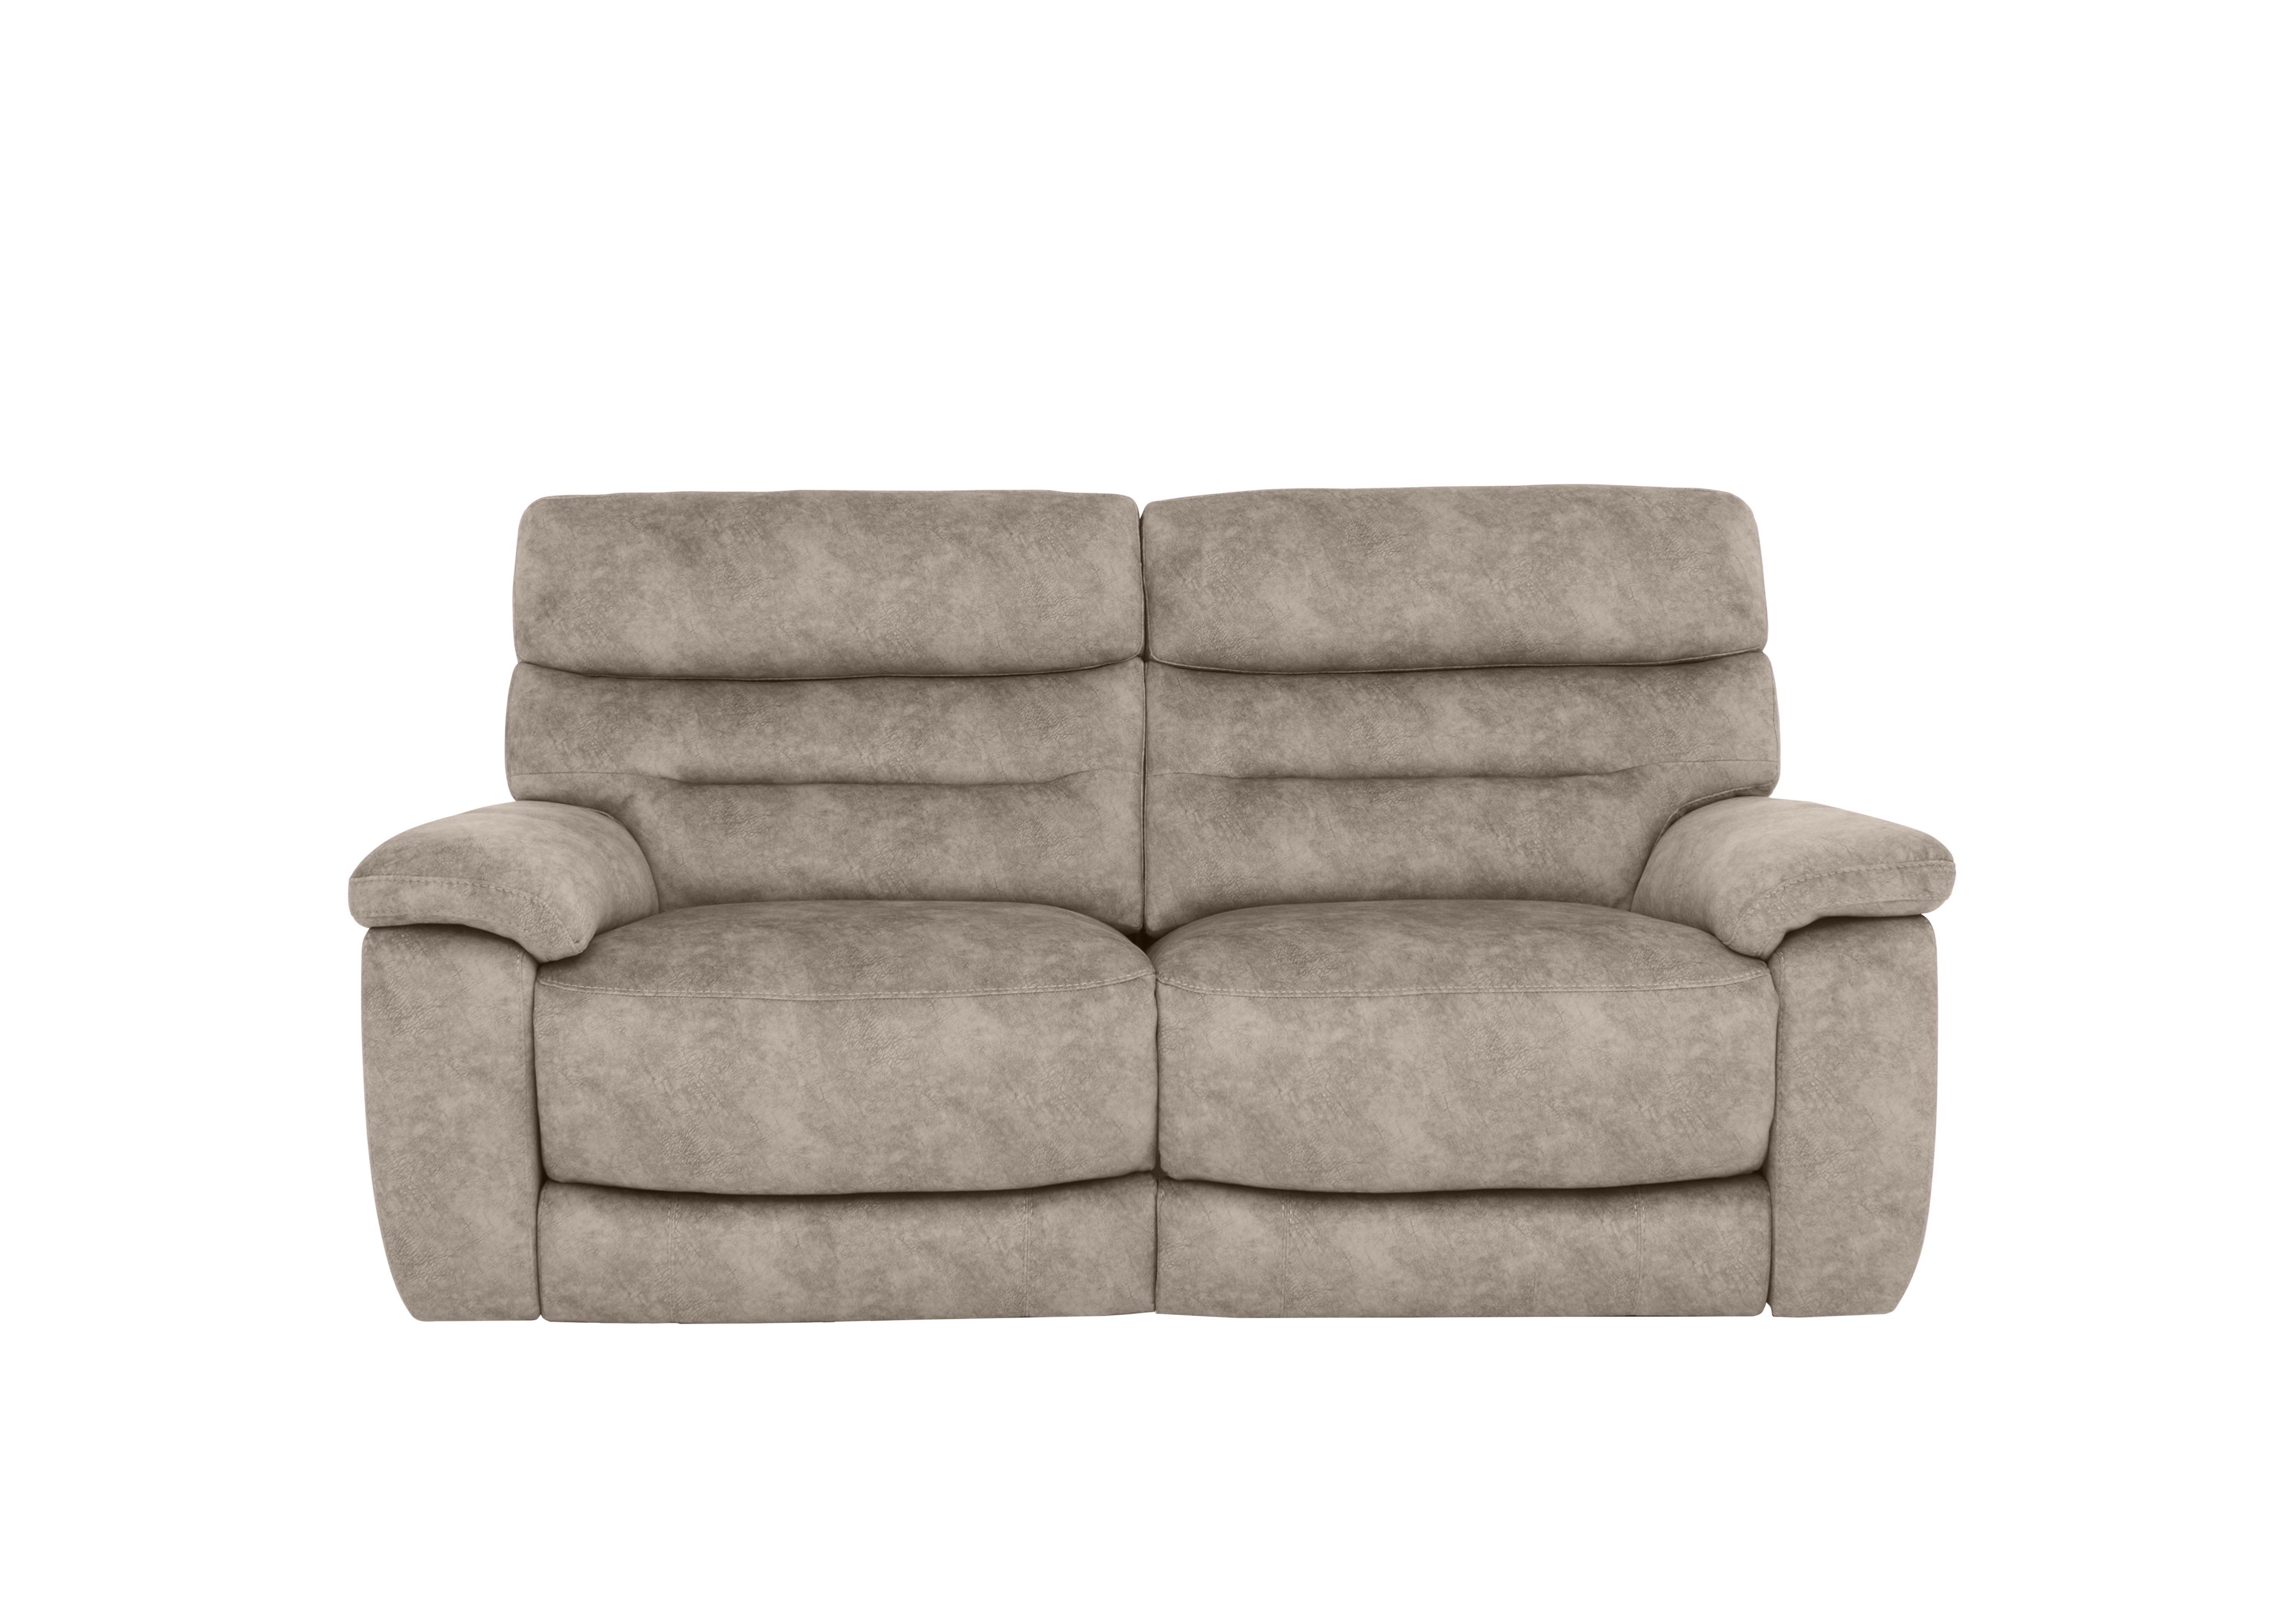 Nimbus 2 Seater Fabric Power Recliner Sofa with Power Headrests and Power Lumbar in Bfa-Bnn-R29 Mink on Furniture Village